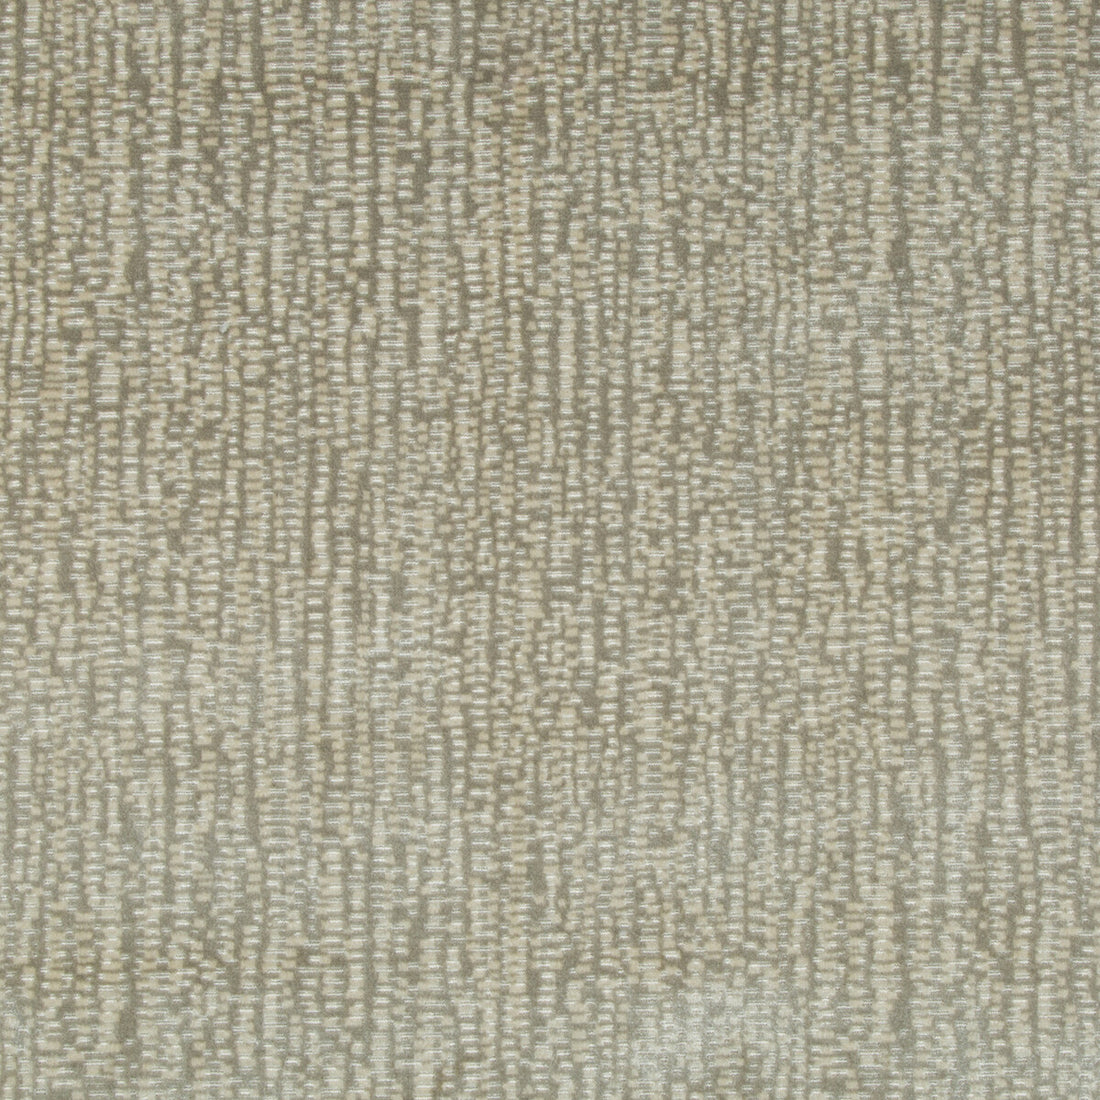 Stepping Stones fabric in sand color - pattern 34788.13.0 - by Kravet Couture in the Artisan Velvets collection